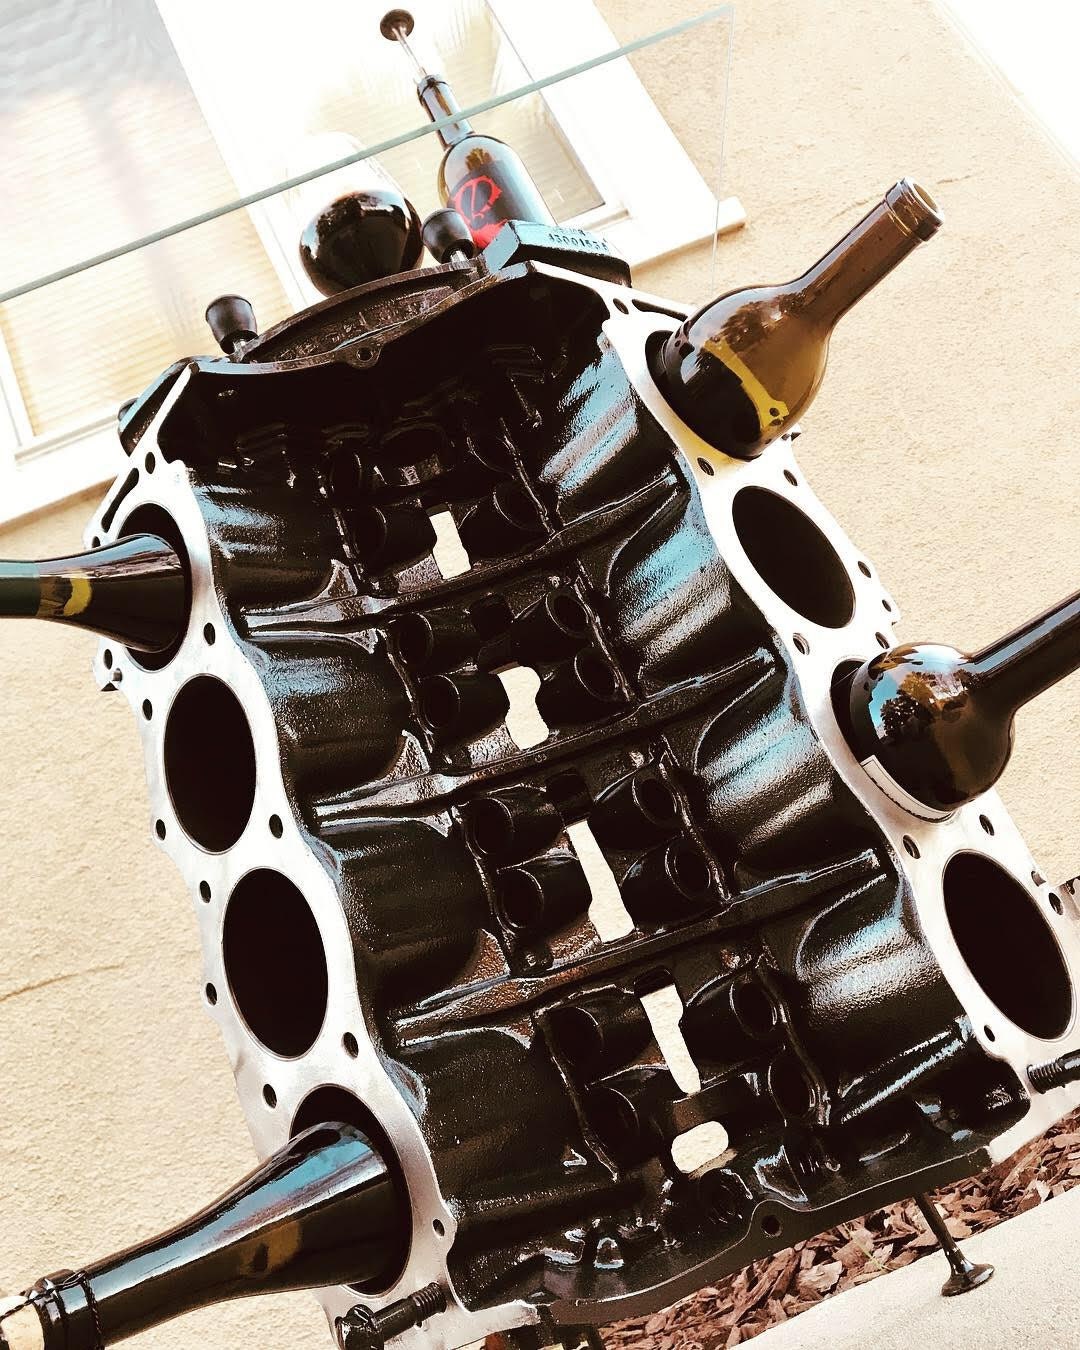 Lower view of an engine block wine rack finished in black with a square glass top, wine bottles stored in its side and a wine bottle and glass on top.